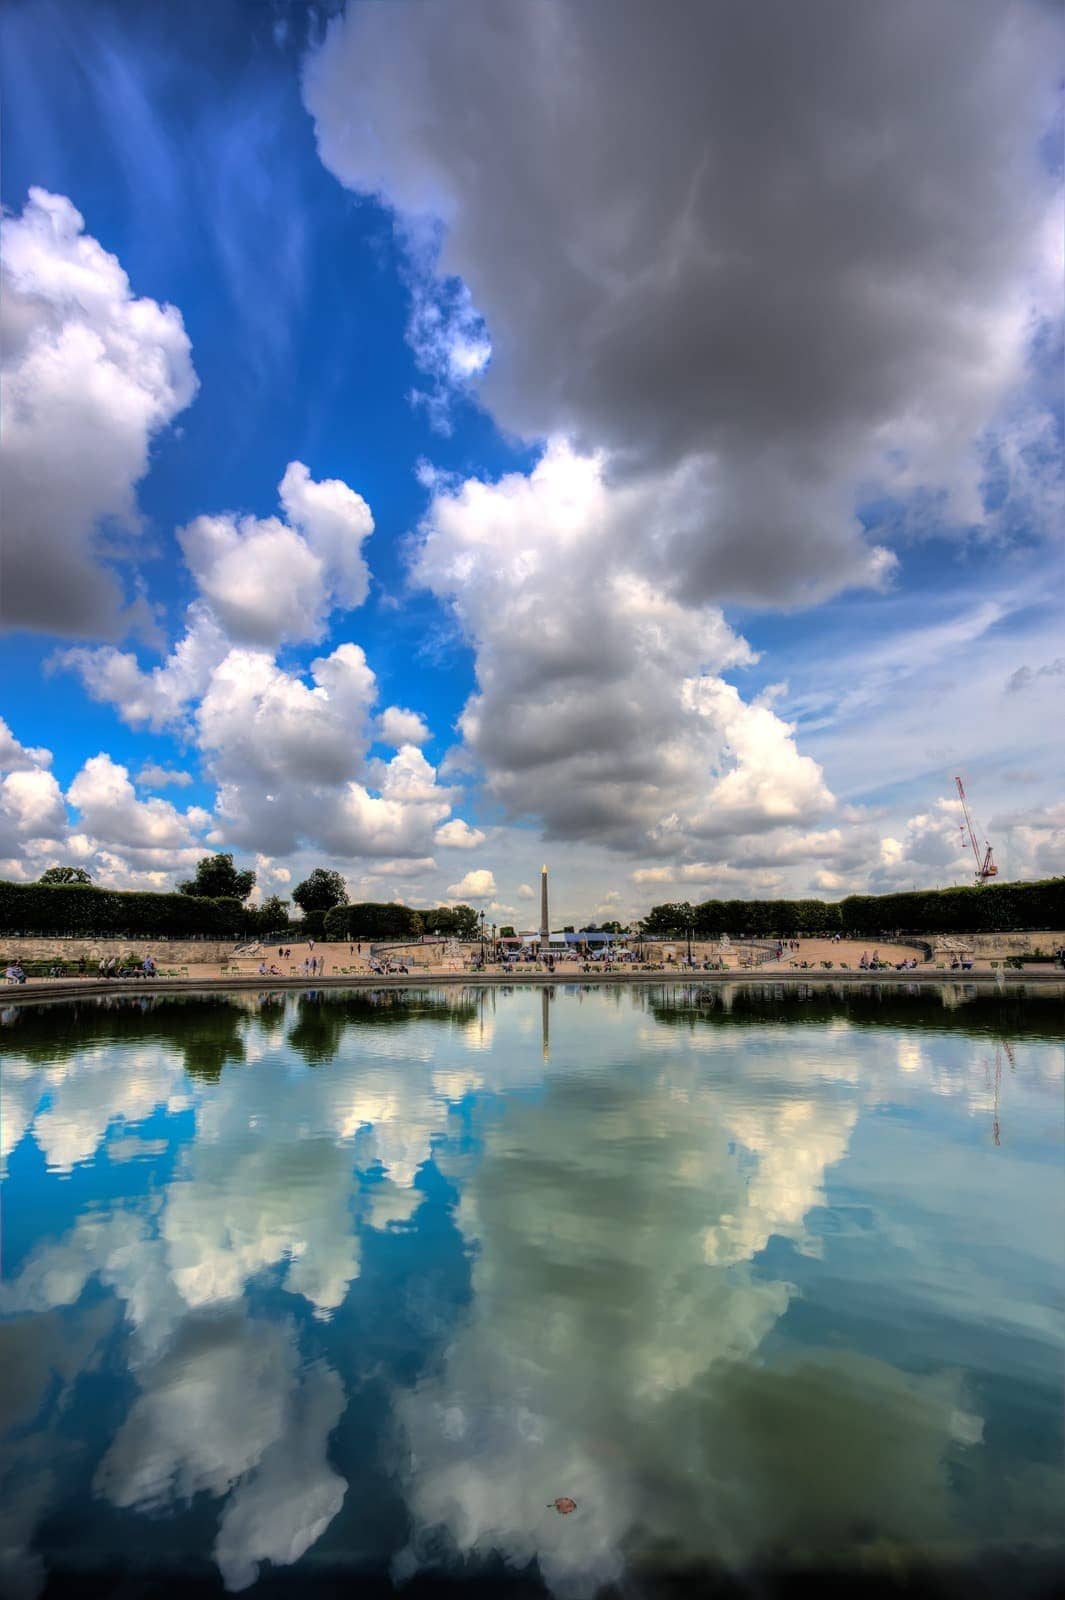 Paris place concorde reflected in tuileries pond